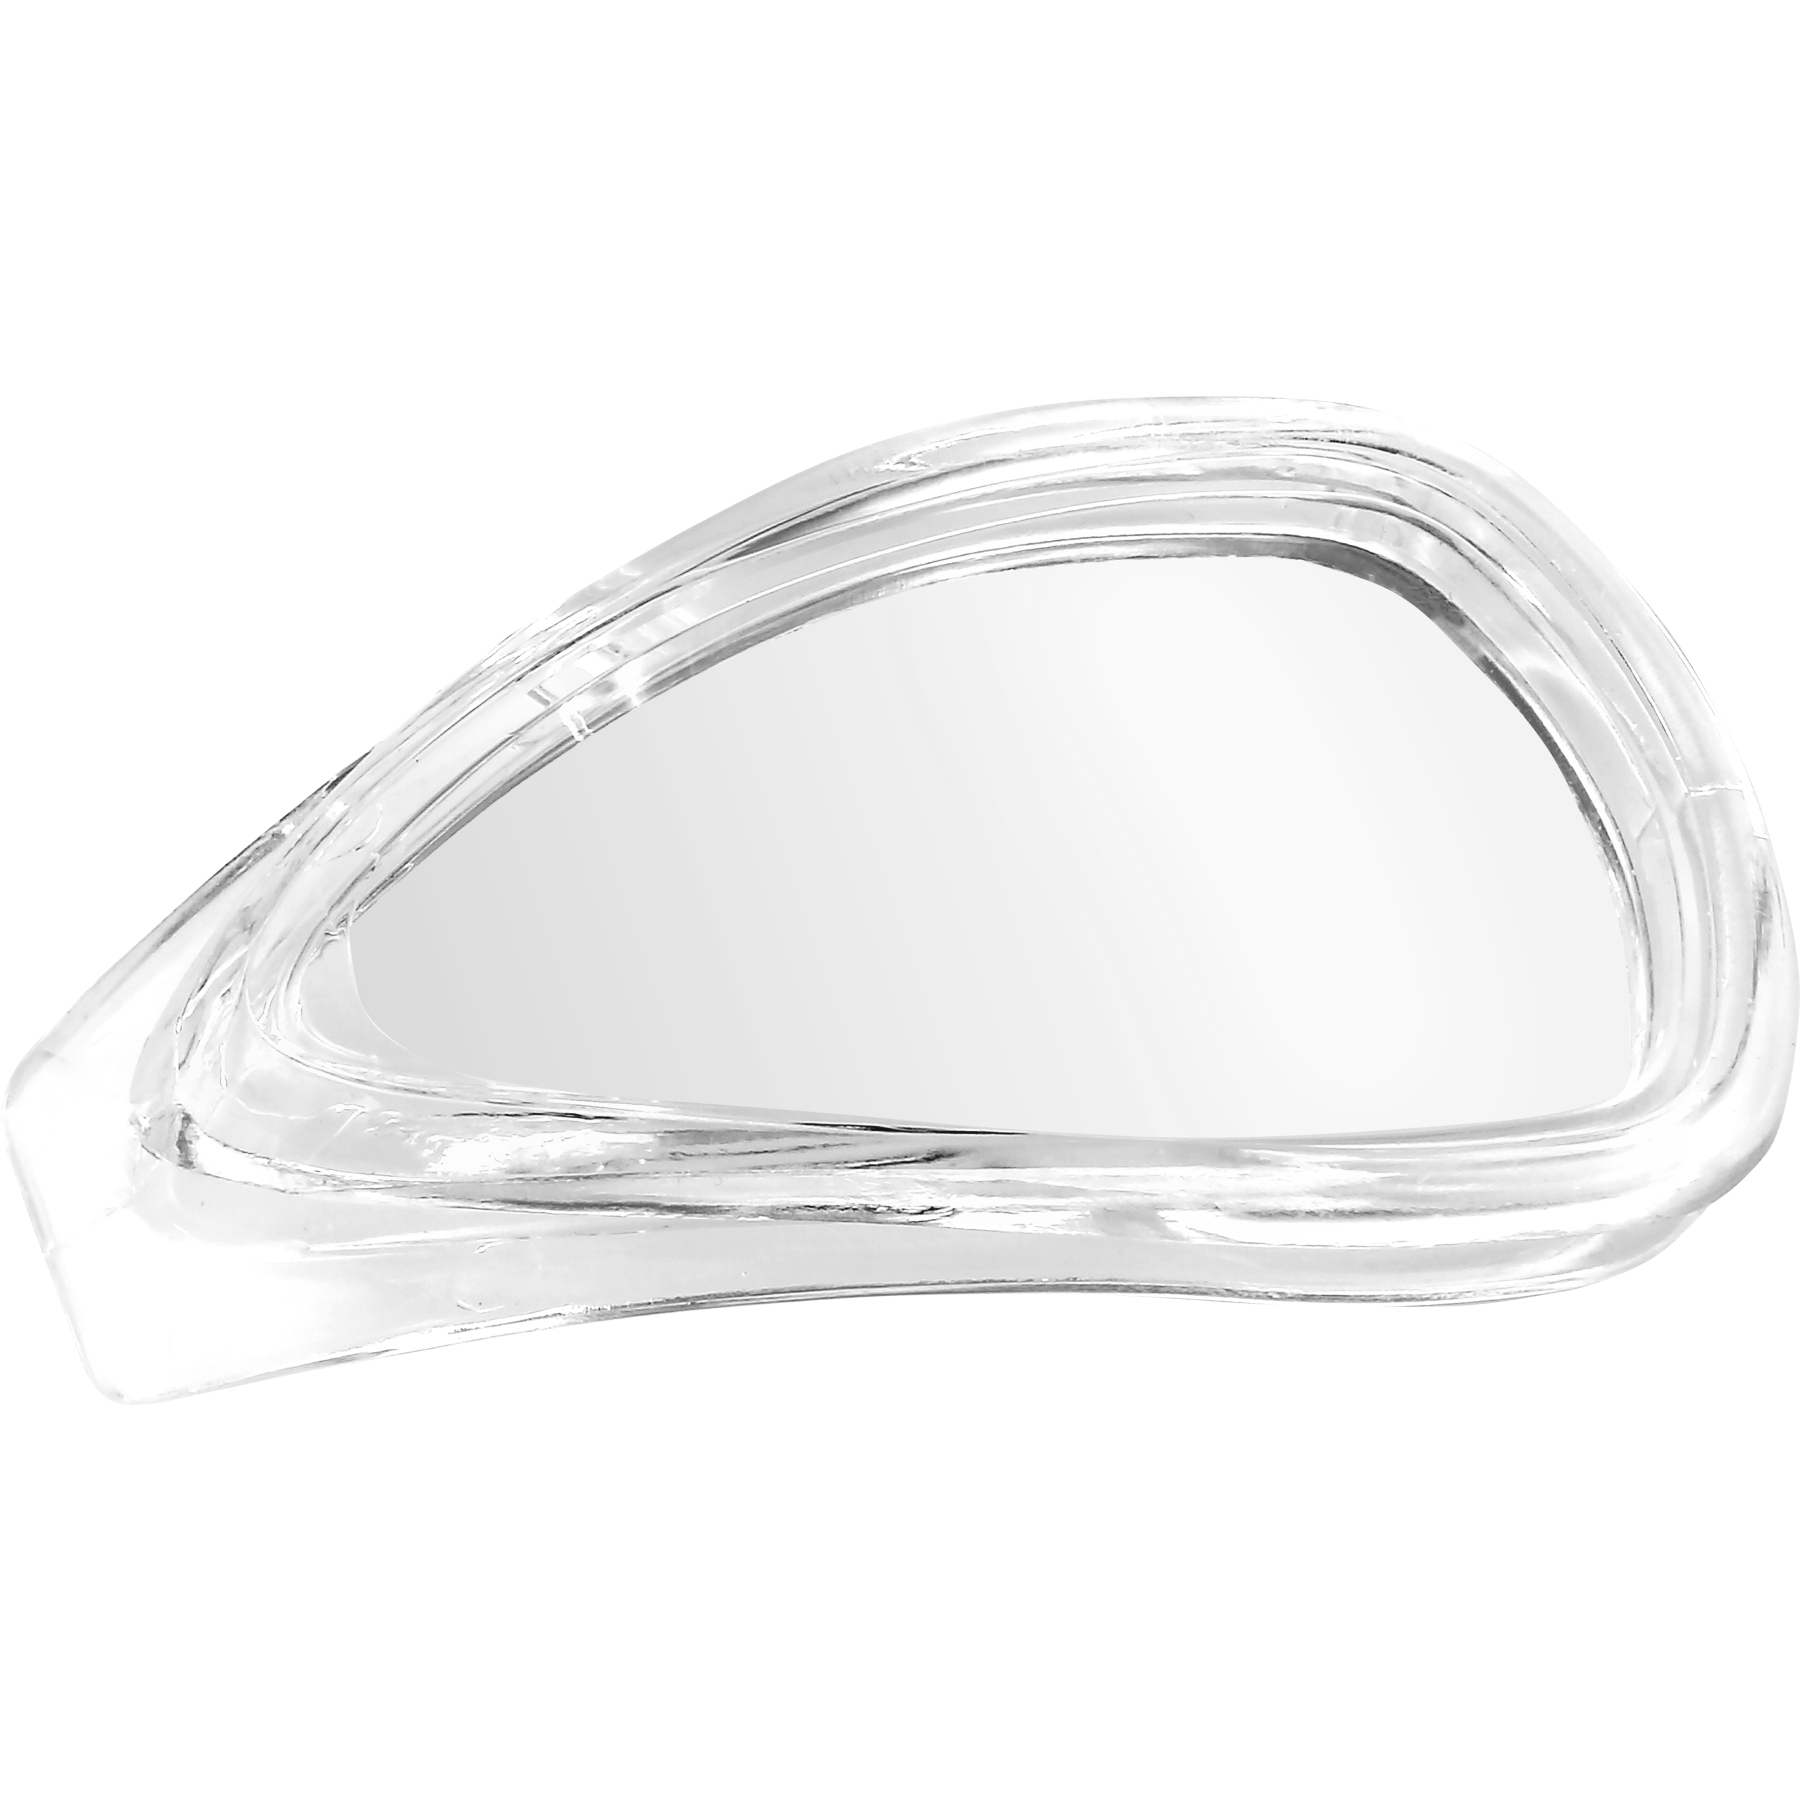 Image of AQUASPHERE Eagle.A Optical Lens - Clear - Transparent -3.0 Diopters